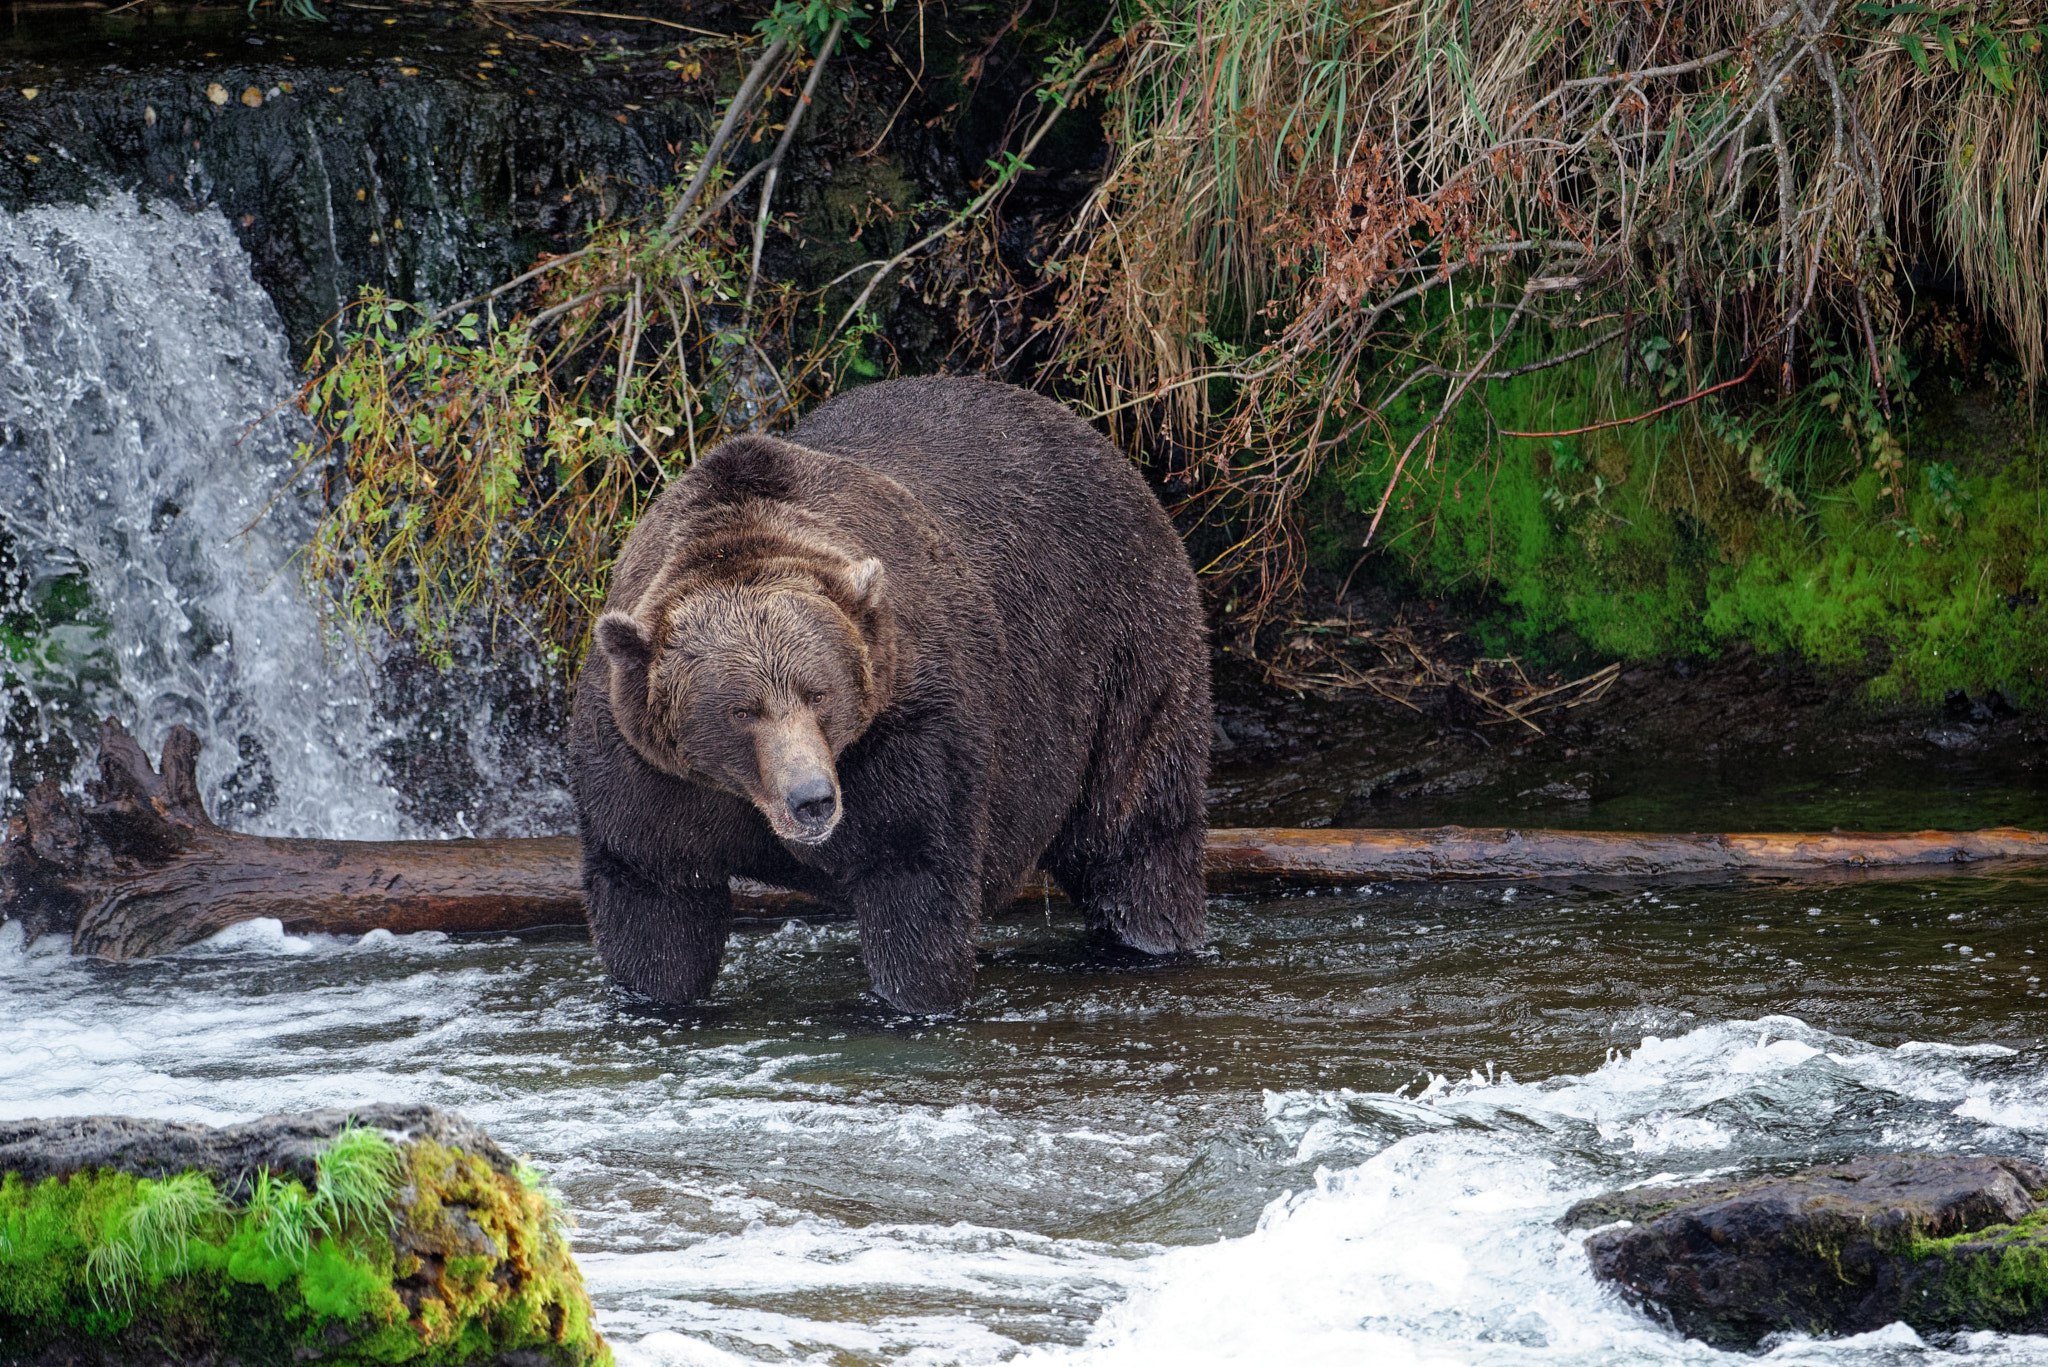 I Do Believe This Bear Has Eaten Quite a Bit of Salmon!